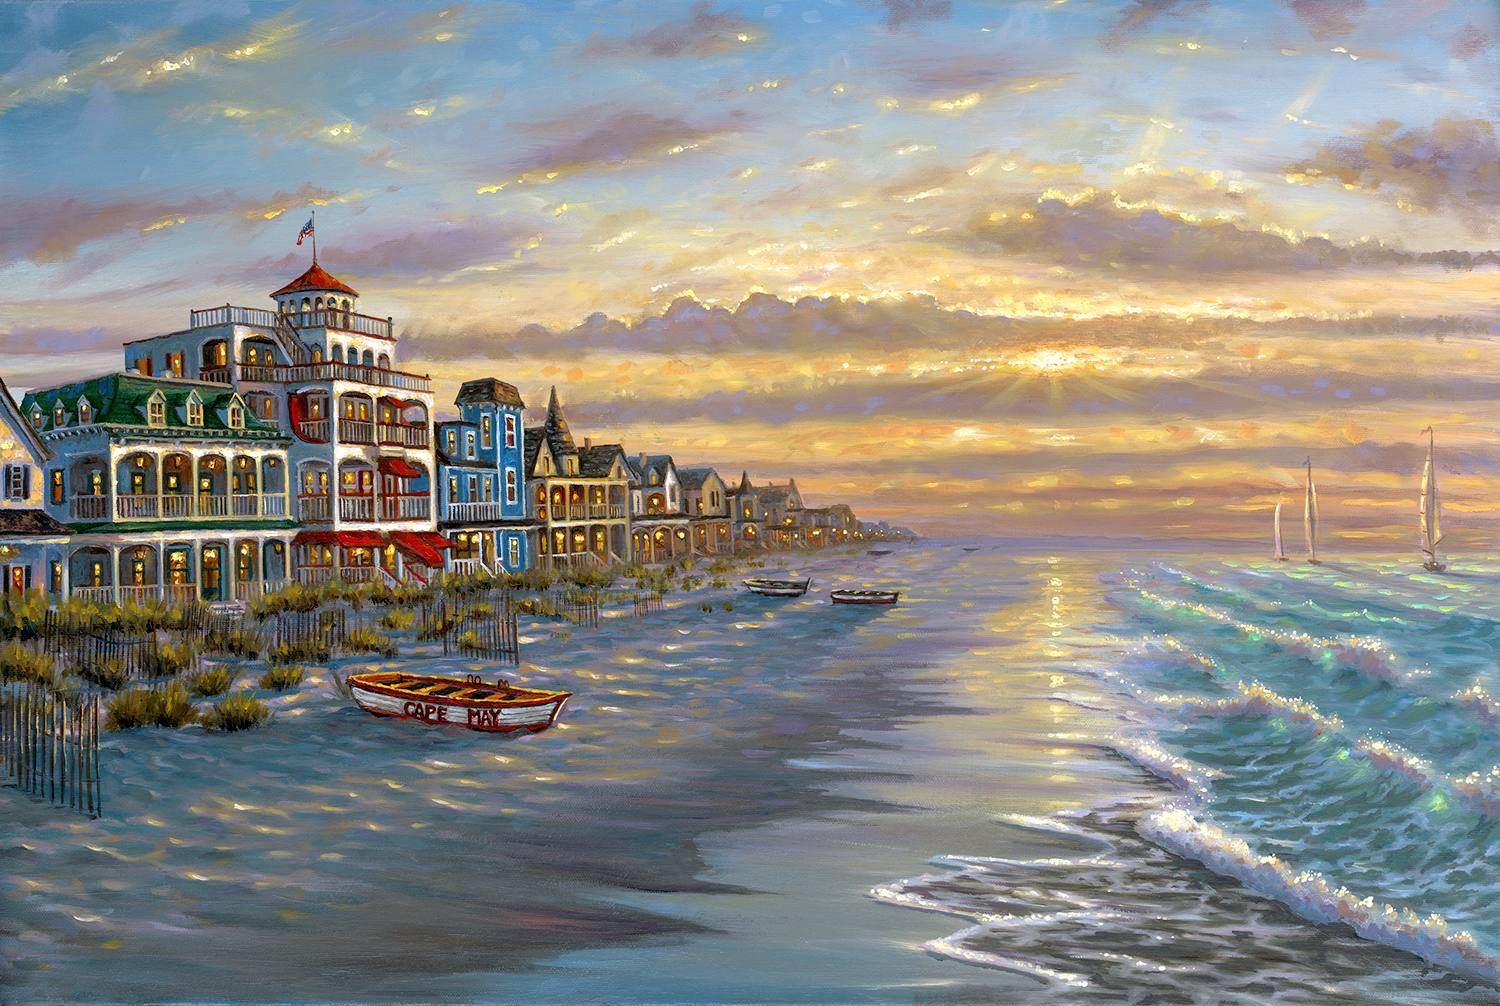 New Day In Cape May By Robert Finale Romantic Paintings